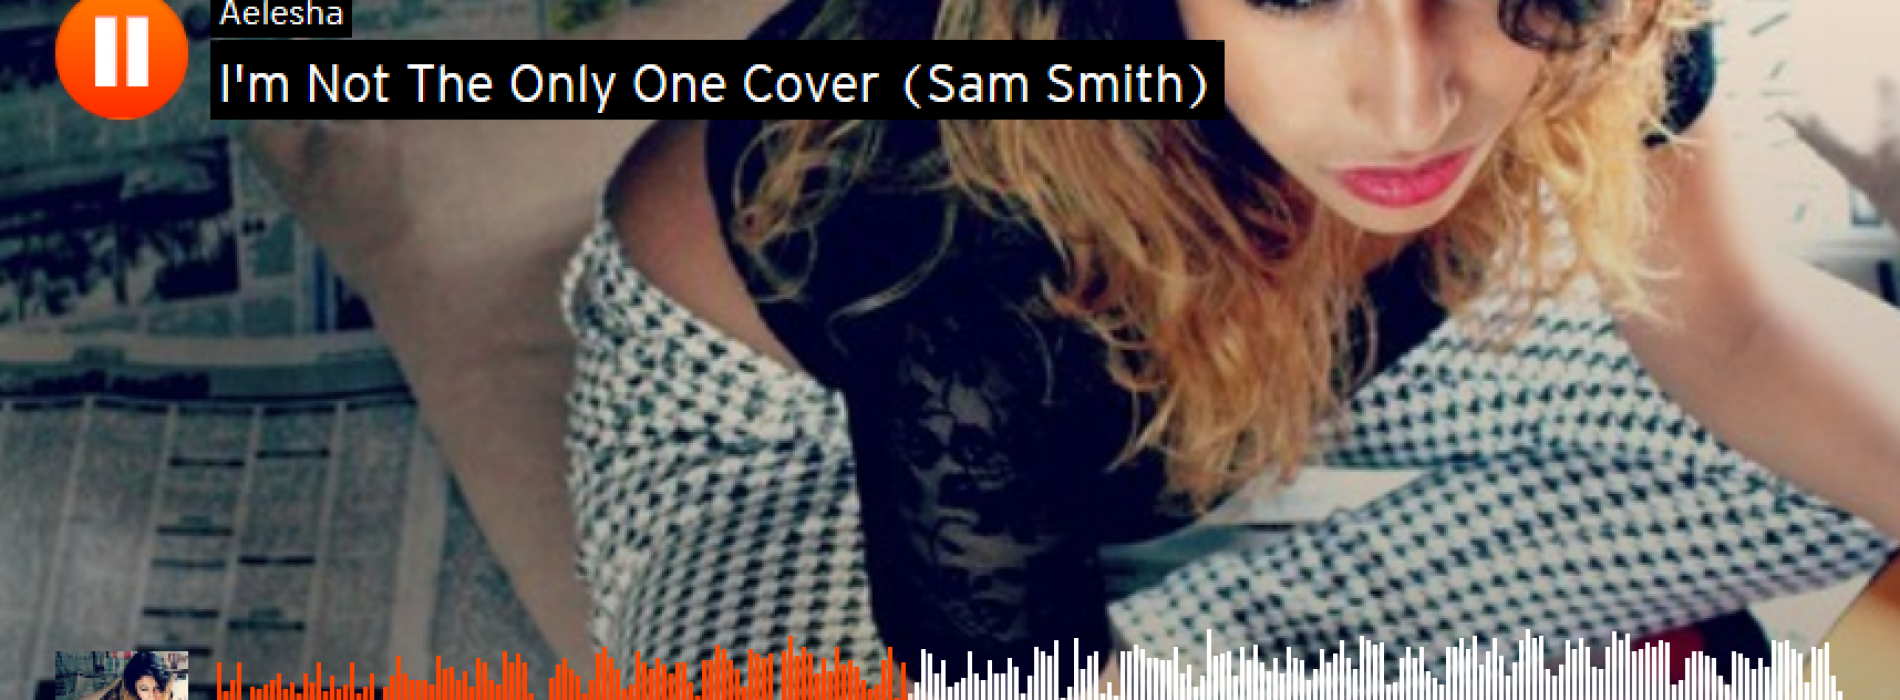 Aelesha – I’m Not The Only One Cover (Sam Smith)